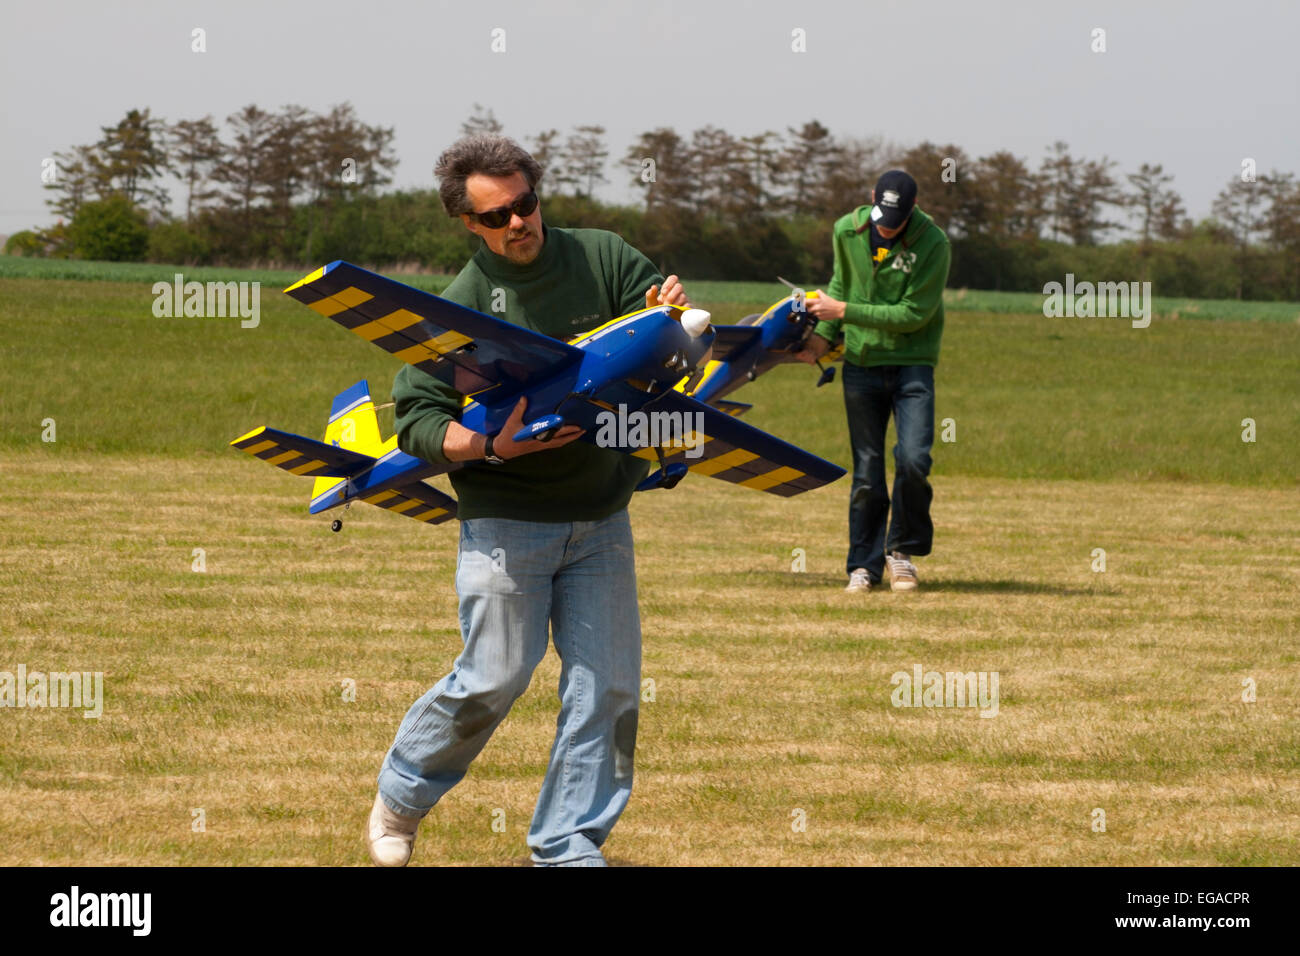 Man carrying large RC model aircraft Stock Photo